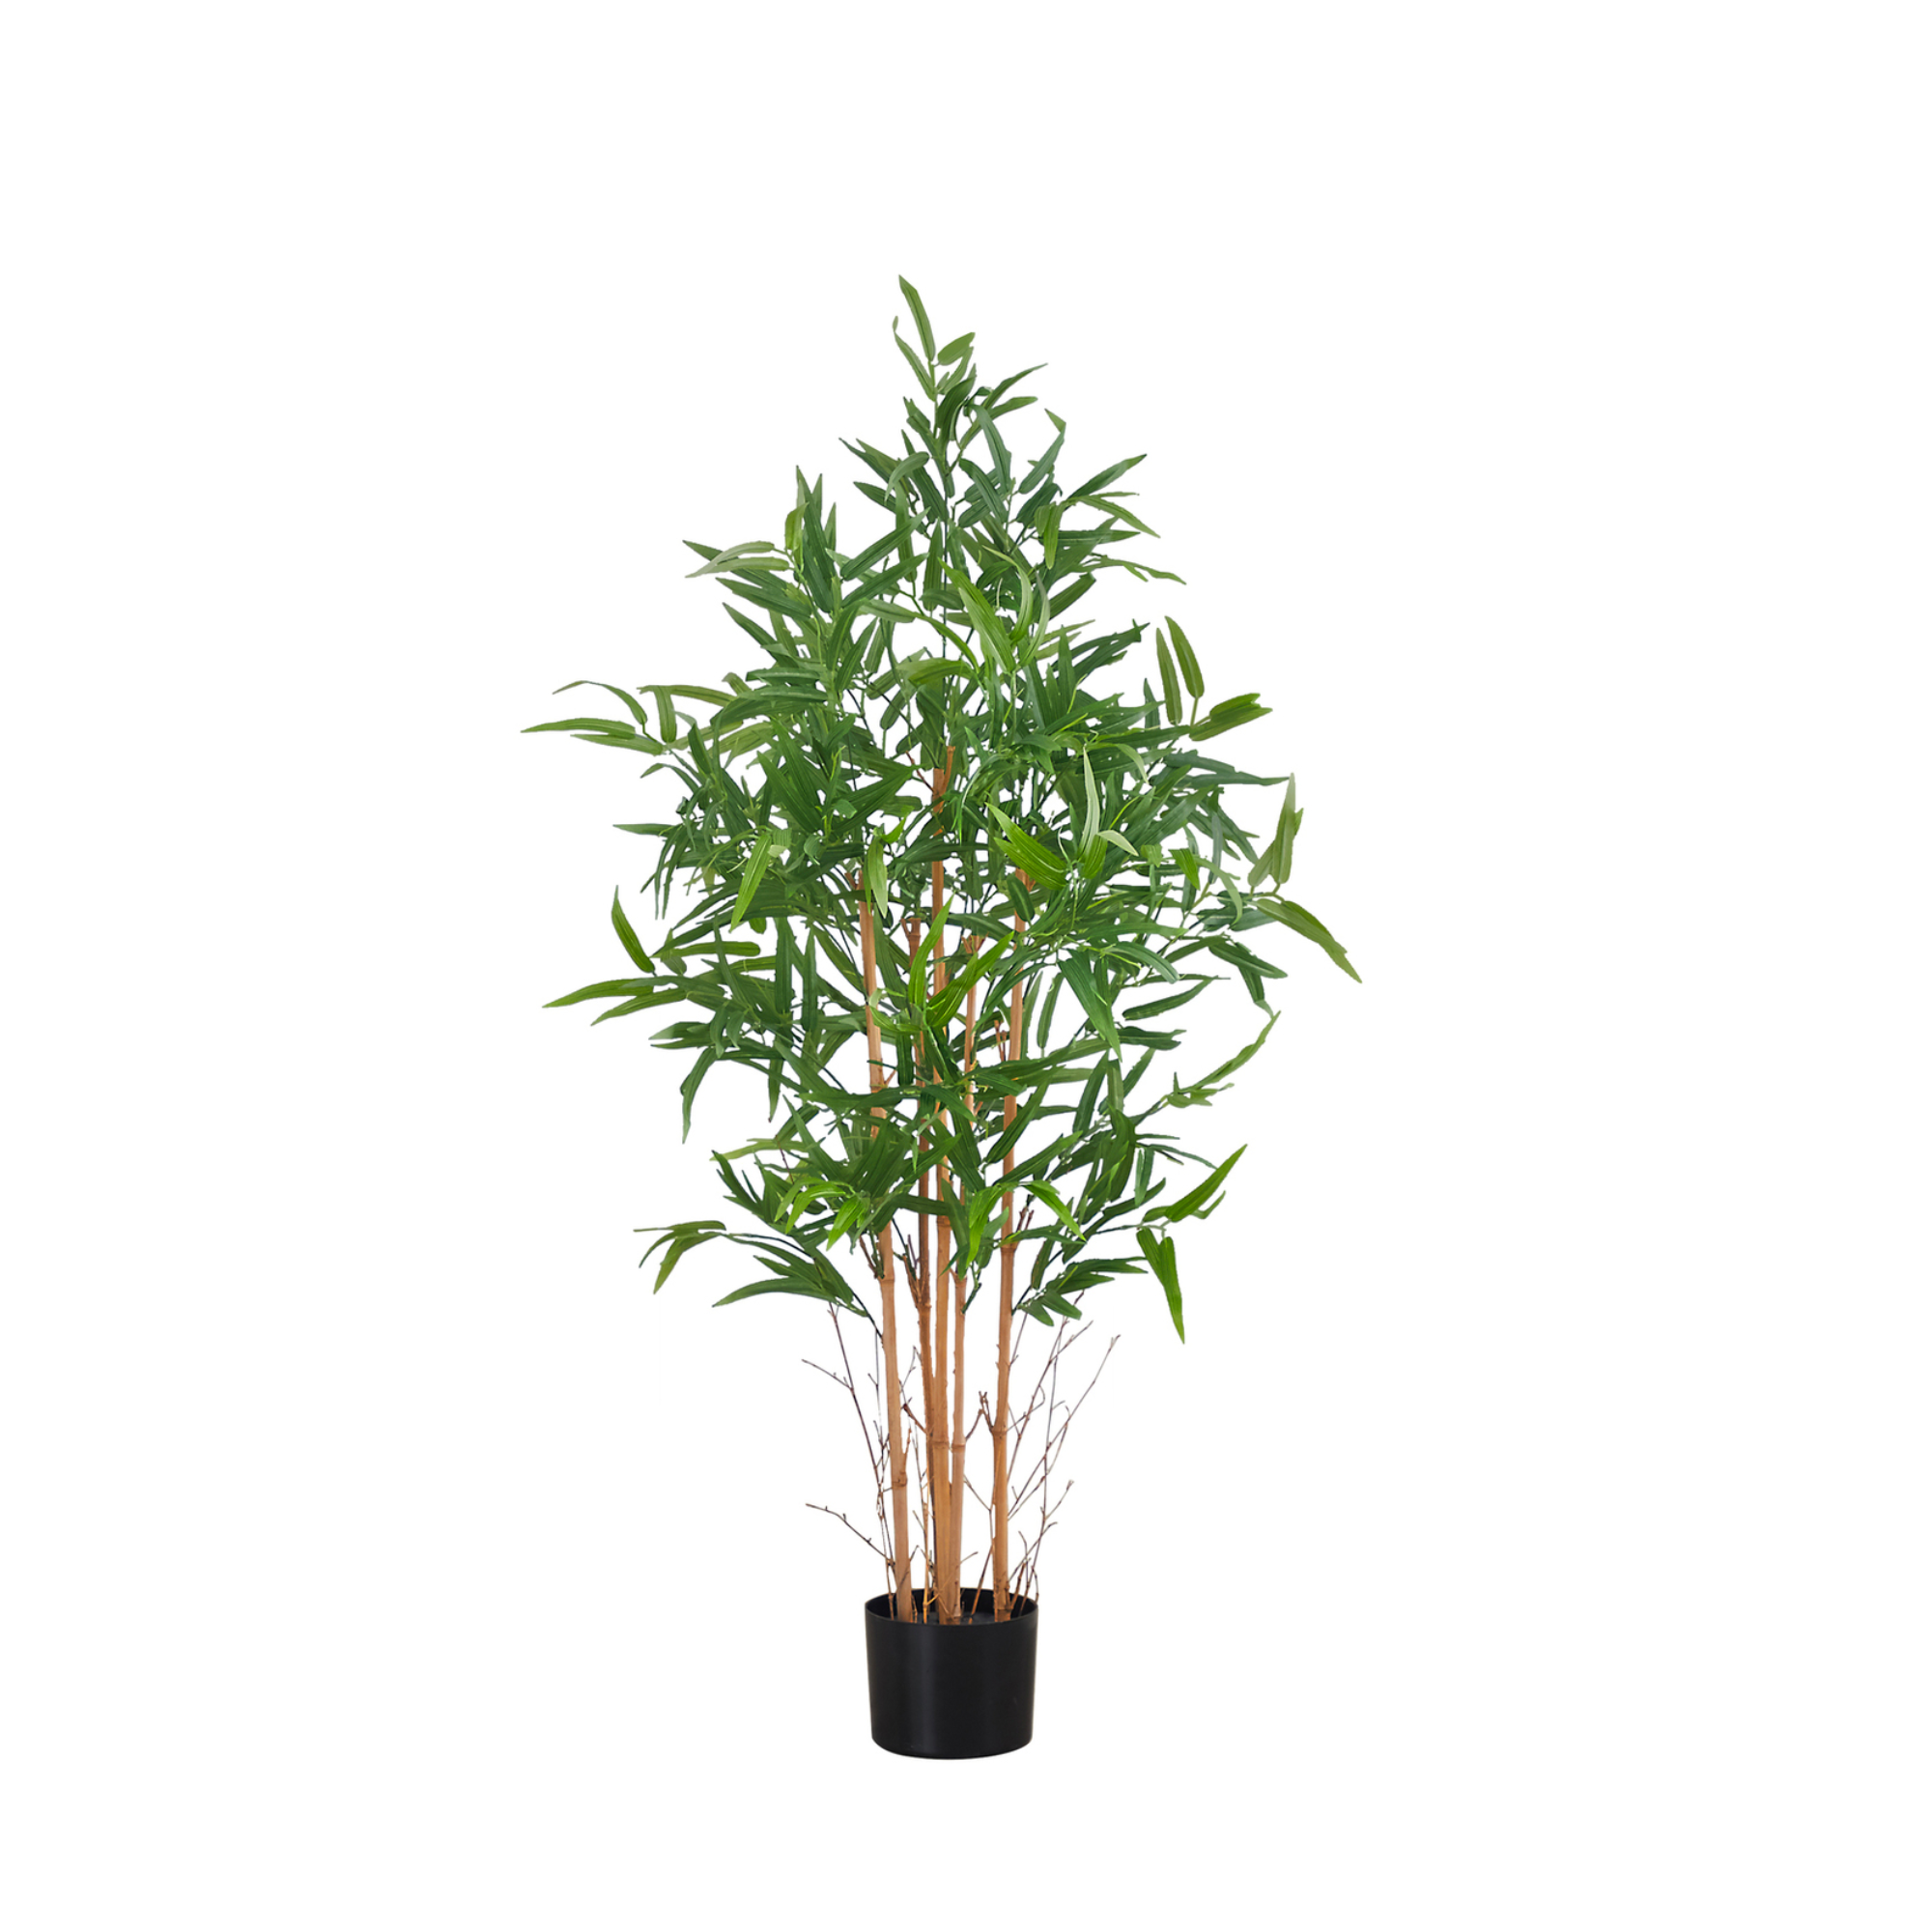 ARTIFICIAL PLANT - 50"H / INDOOR BAMBOO TREE IN A 5" POT